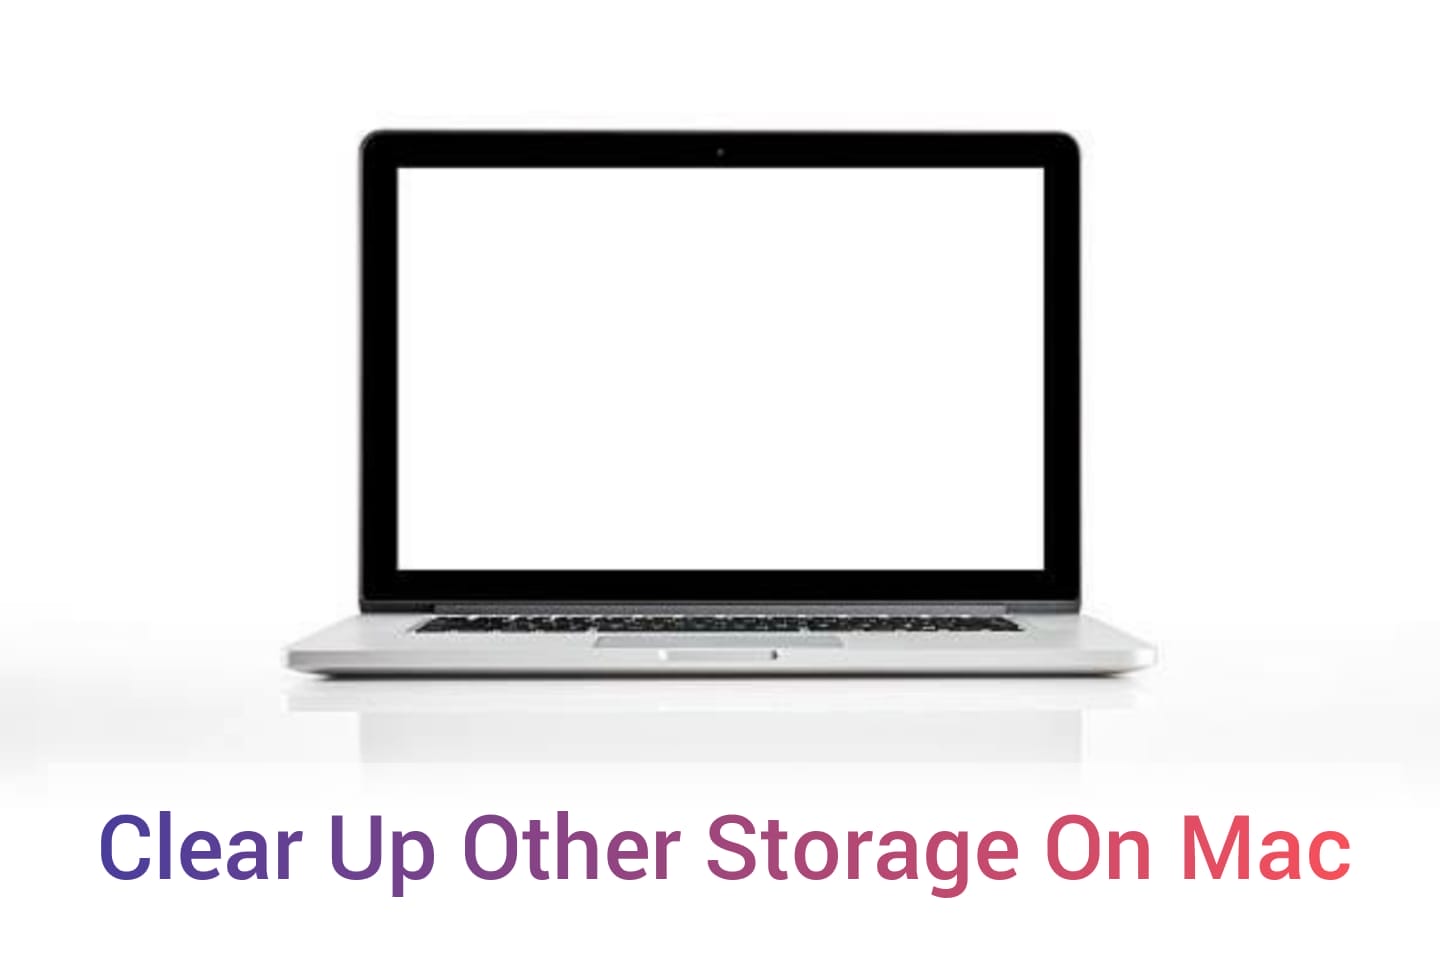 Clear up other storage on mac